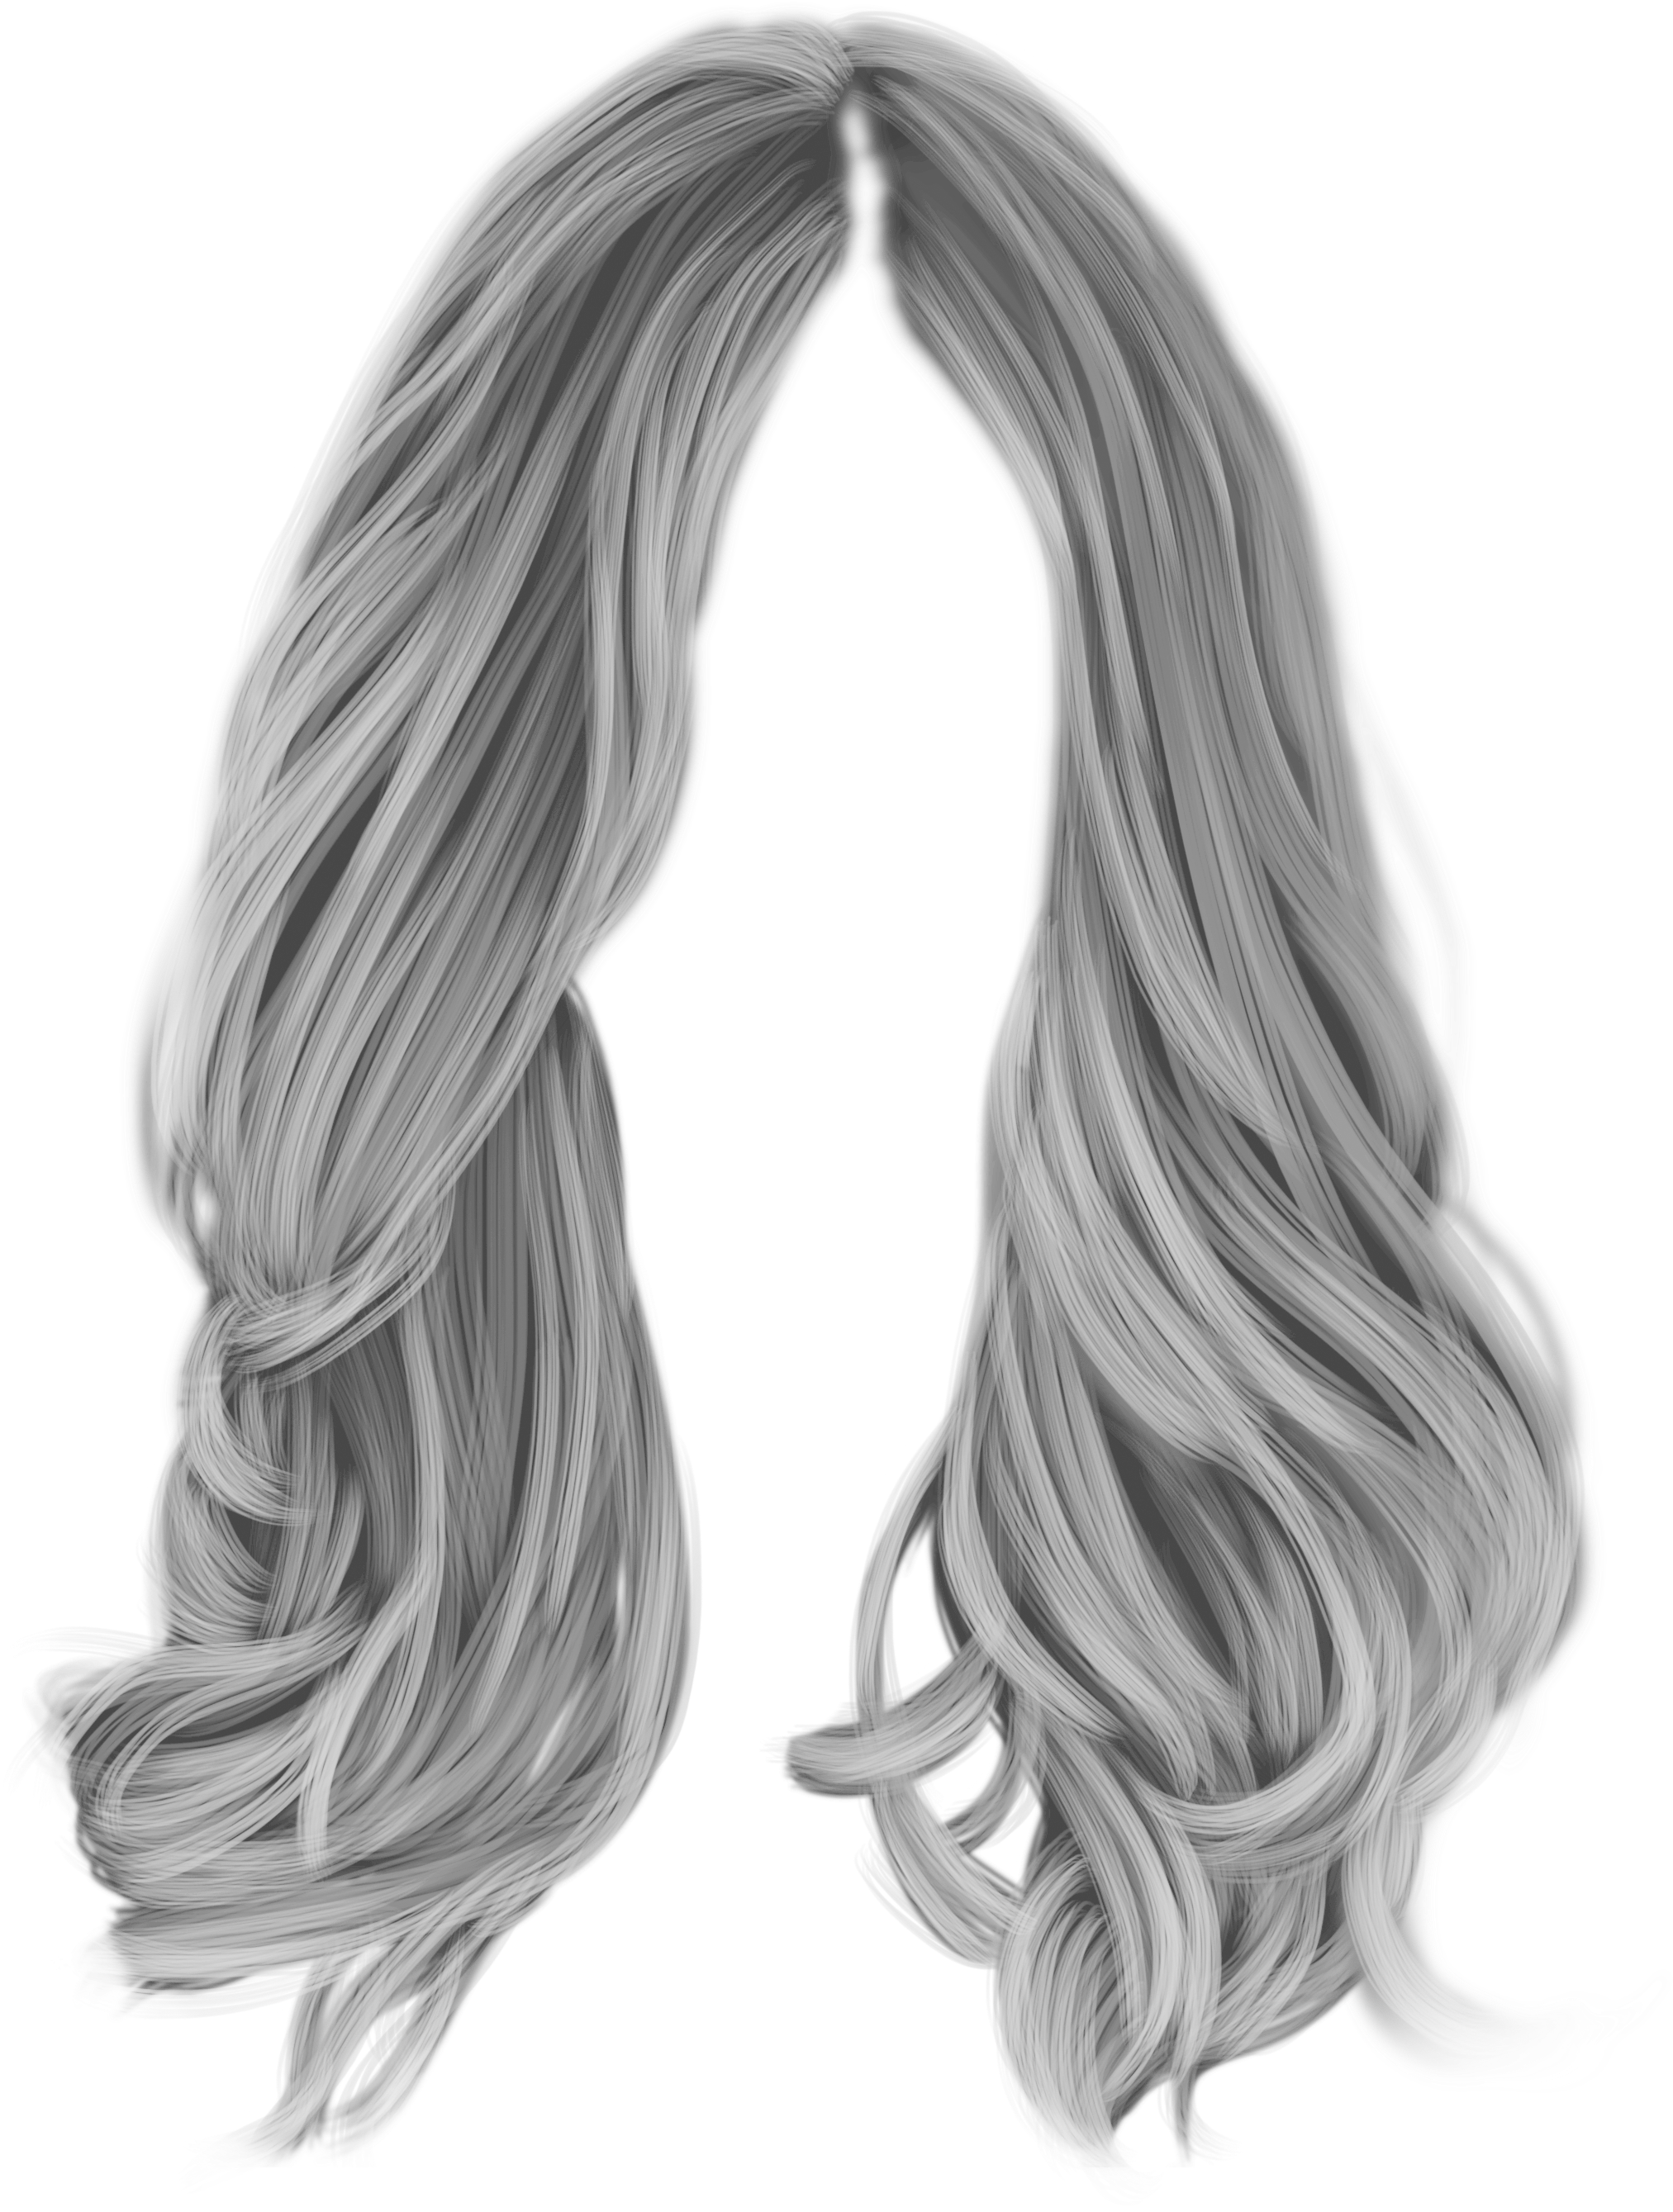 Wig PNG Image HD - PNG All